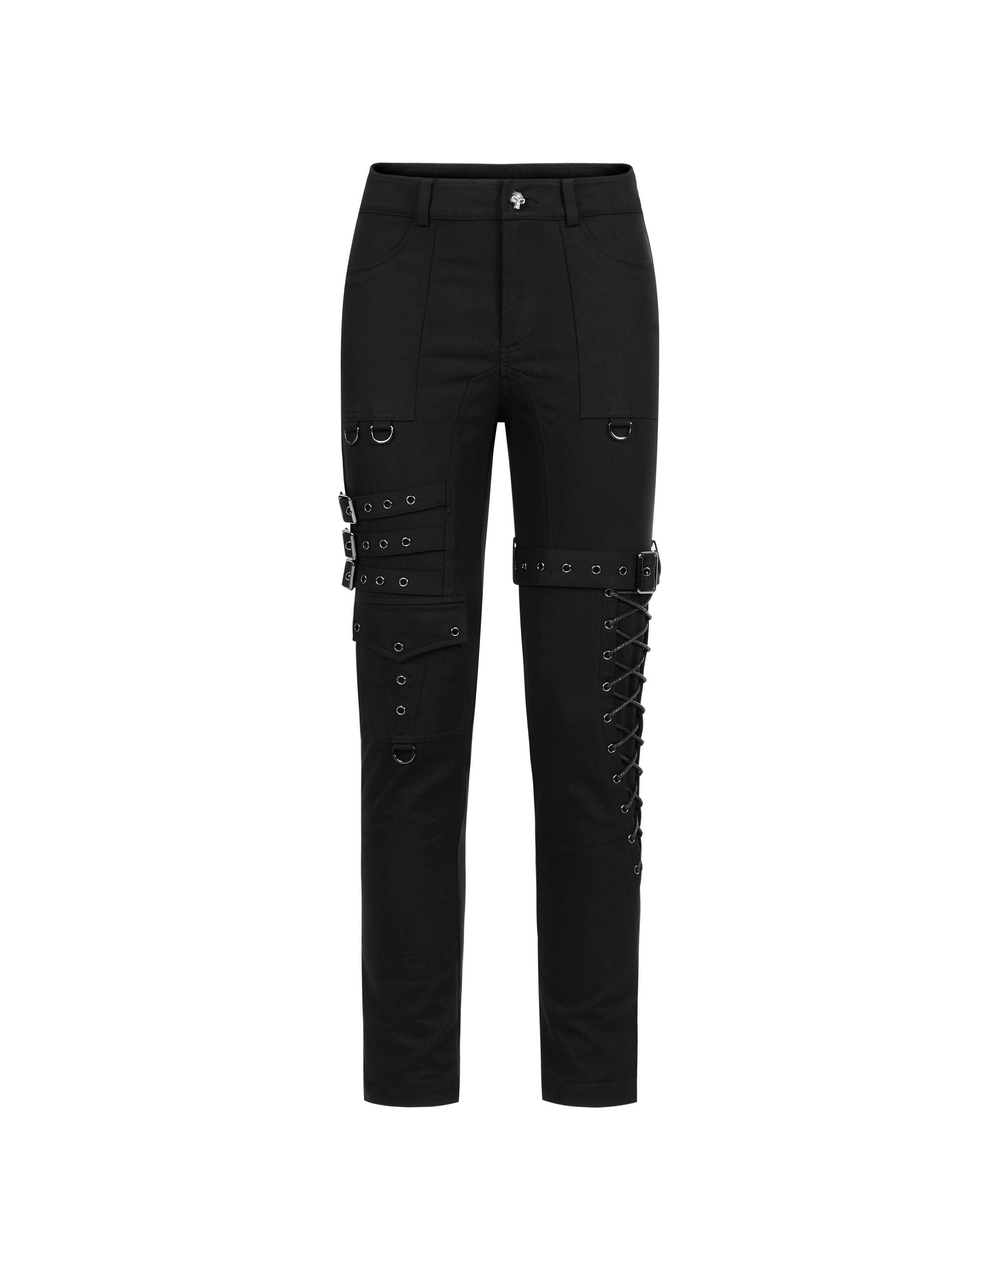 Men's Gothic Cargo Pants with Buckles and Lace-up Detail